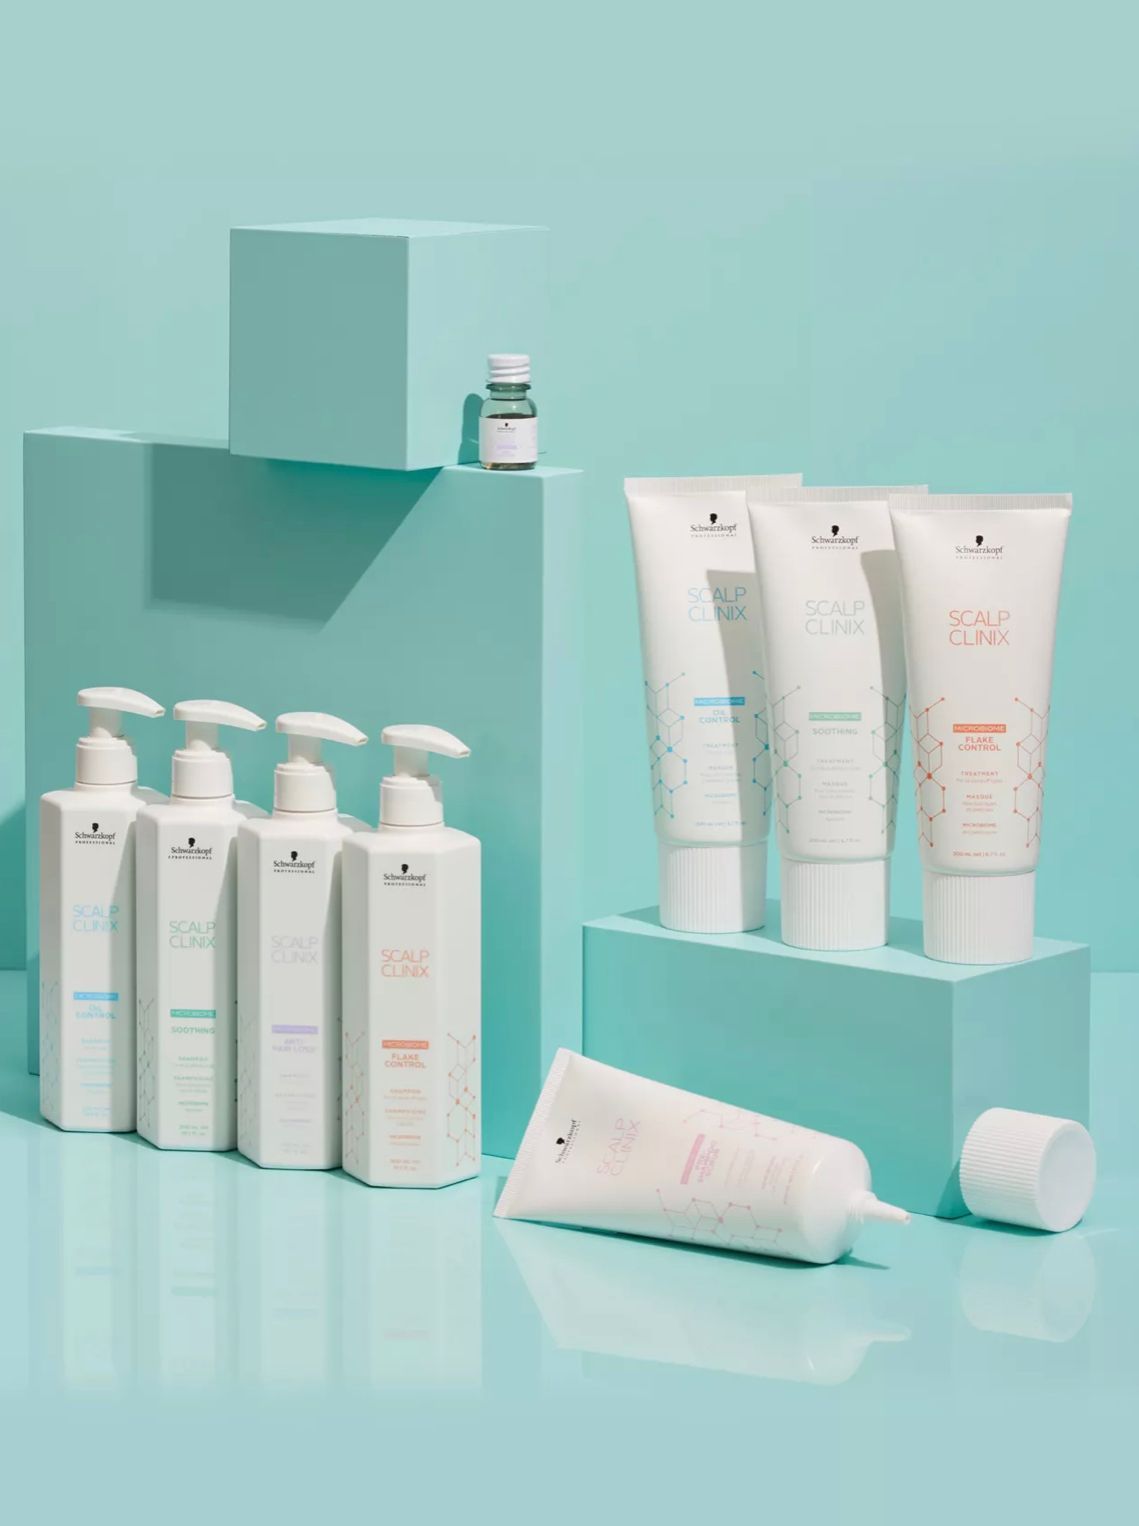 Product images of Schwarzkopf professional Scalp Clinix